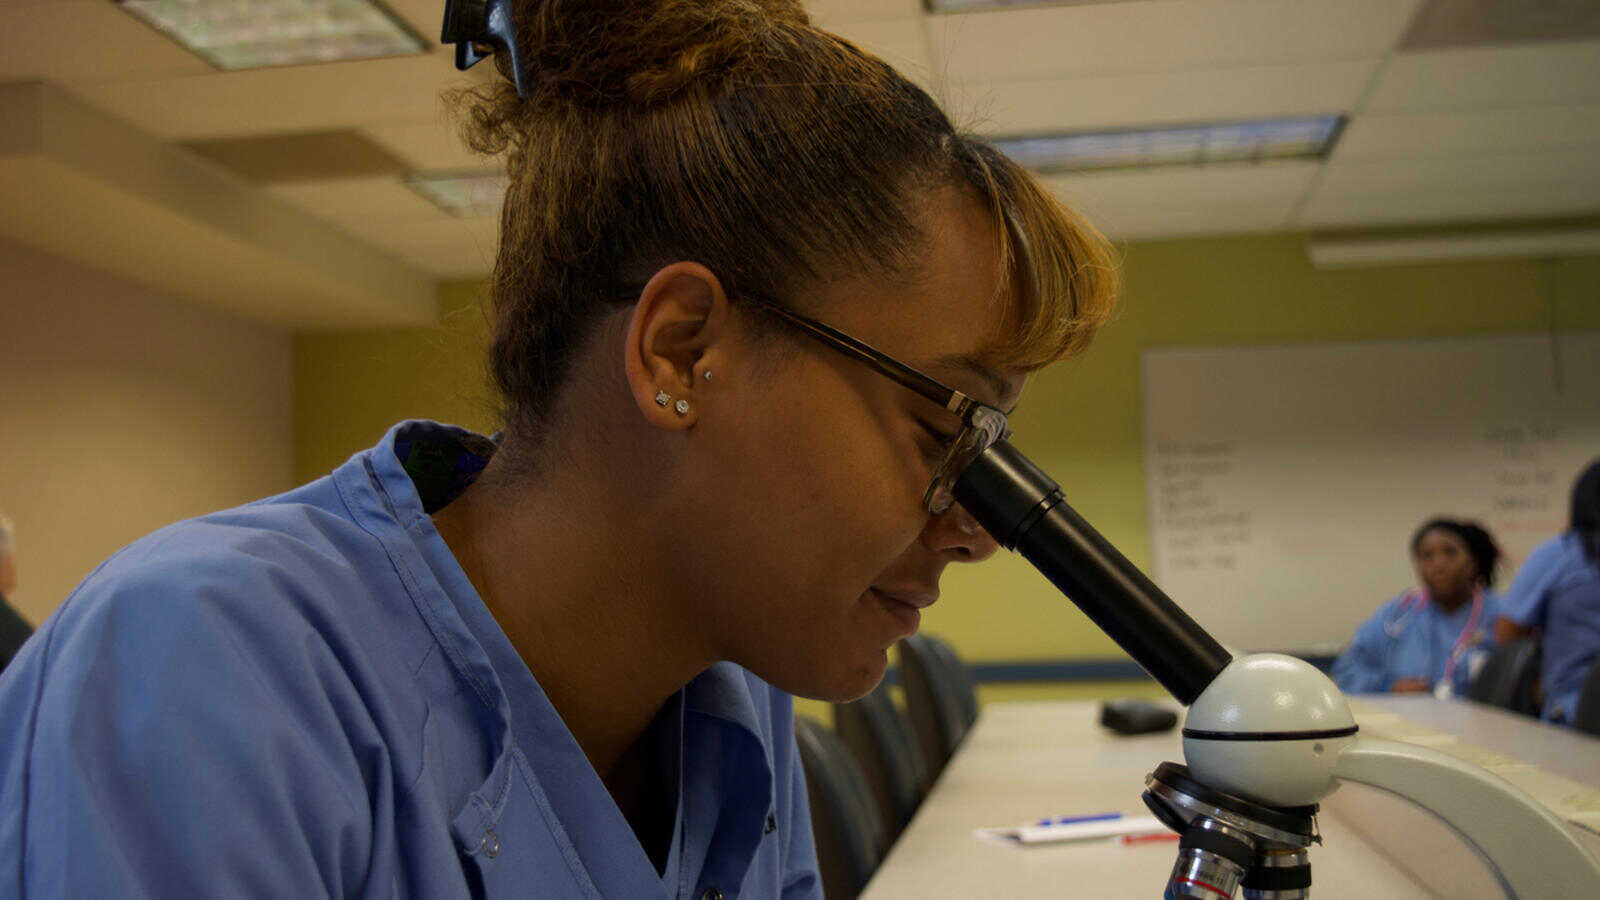 A student of the medical assistant program examines a specimen under a microscope